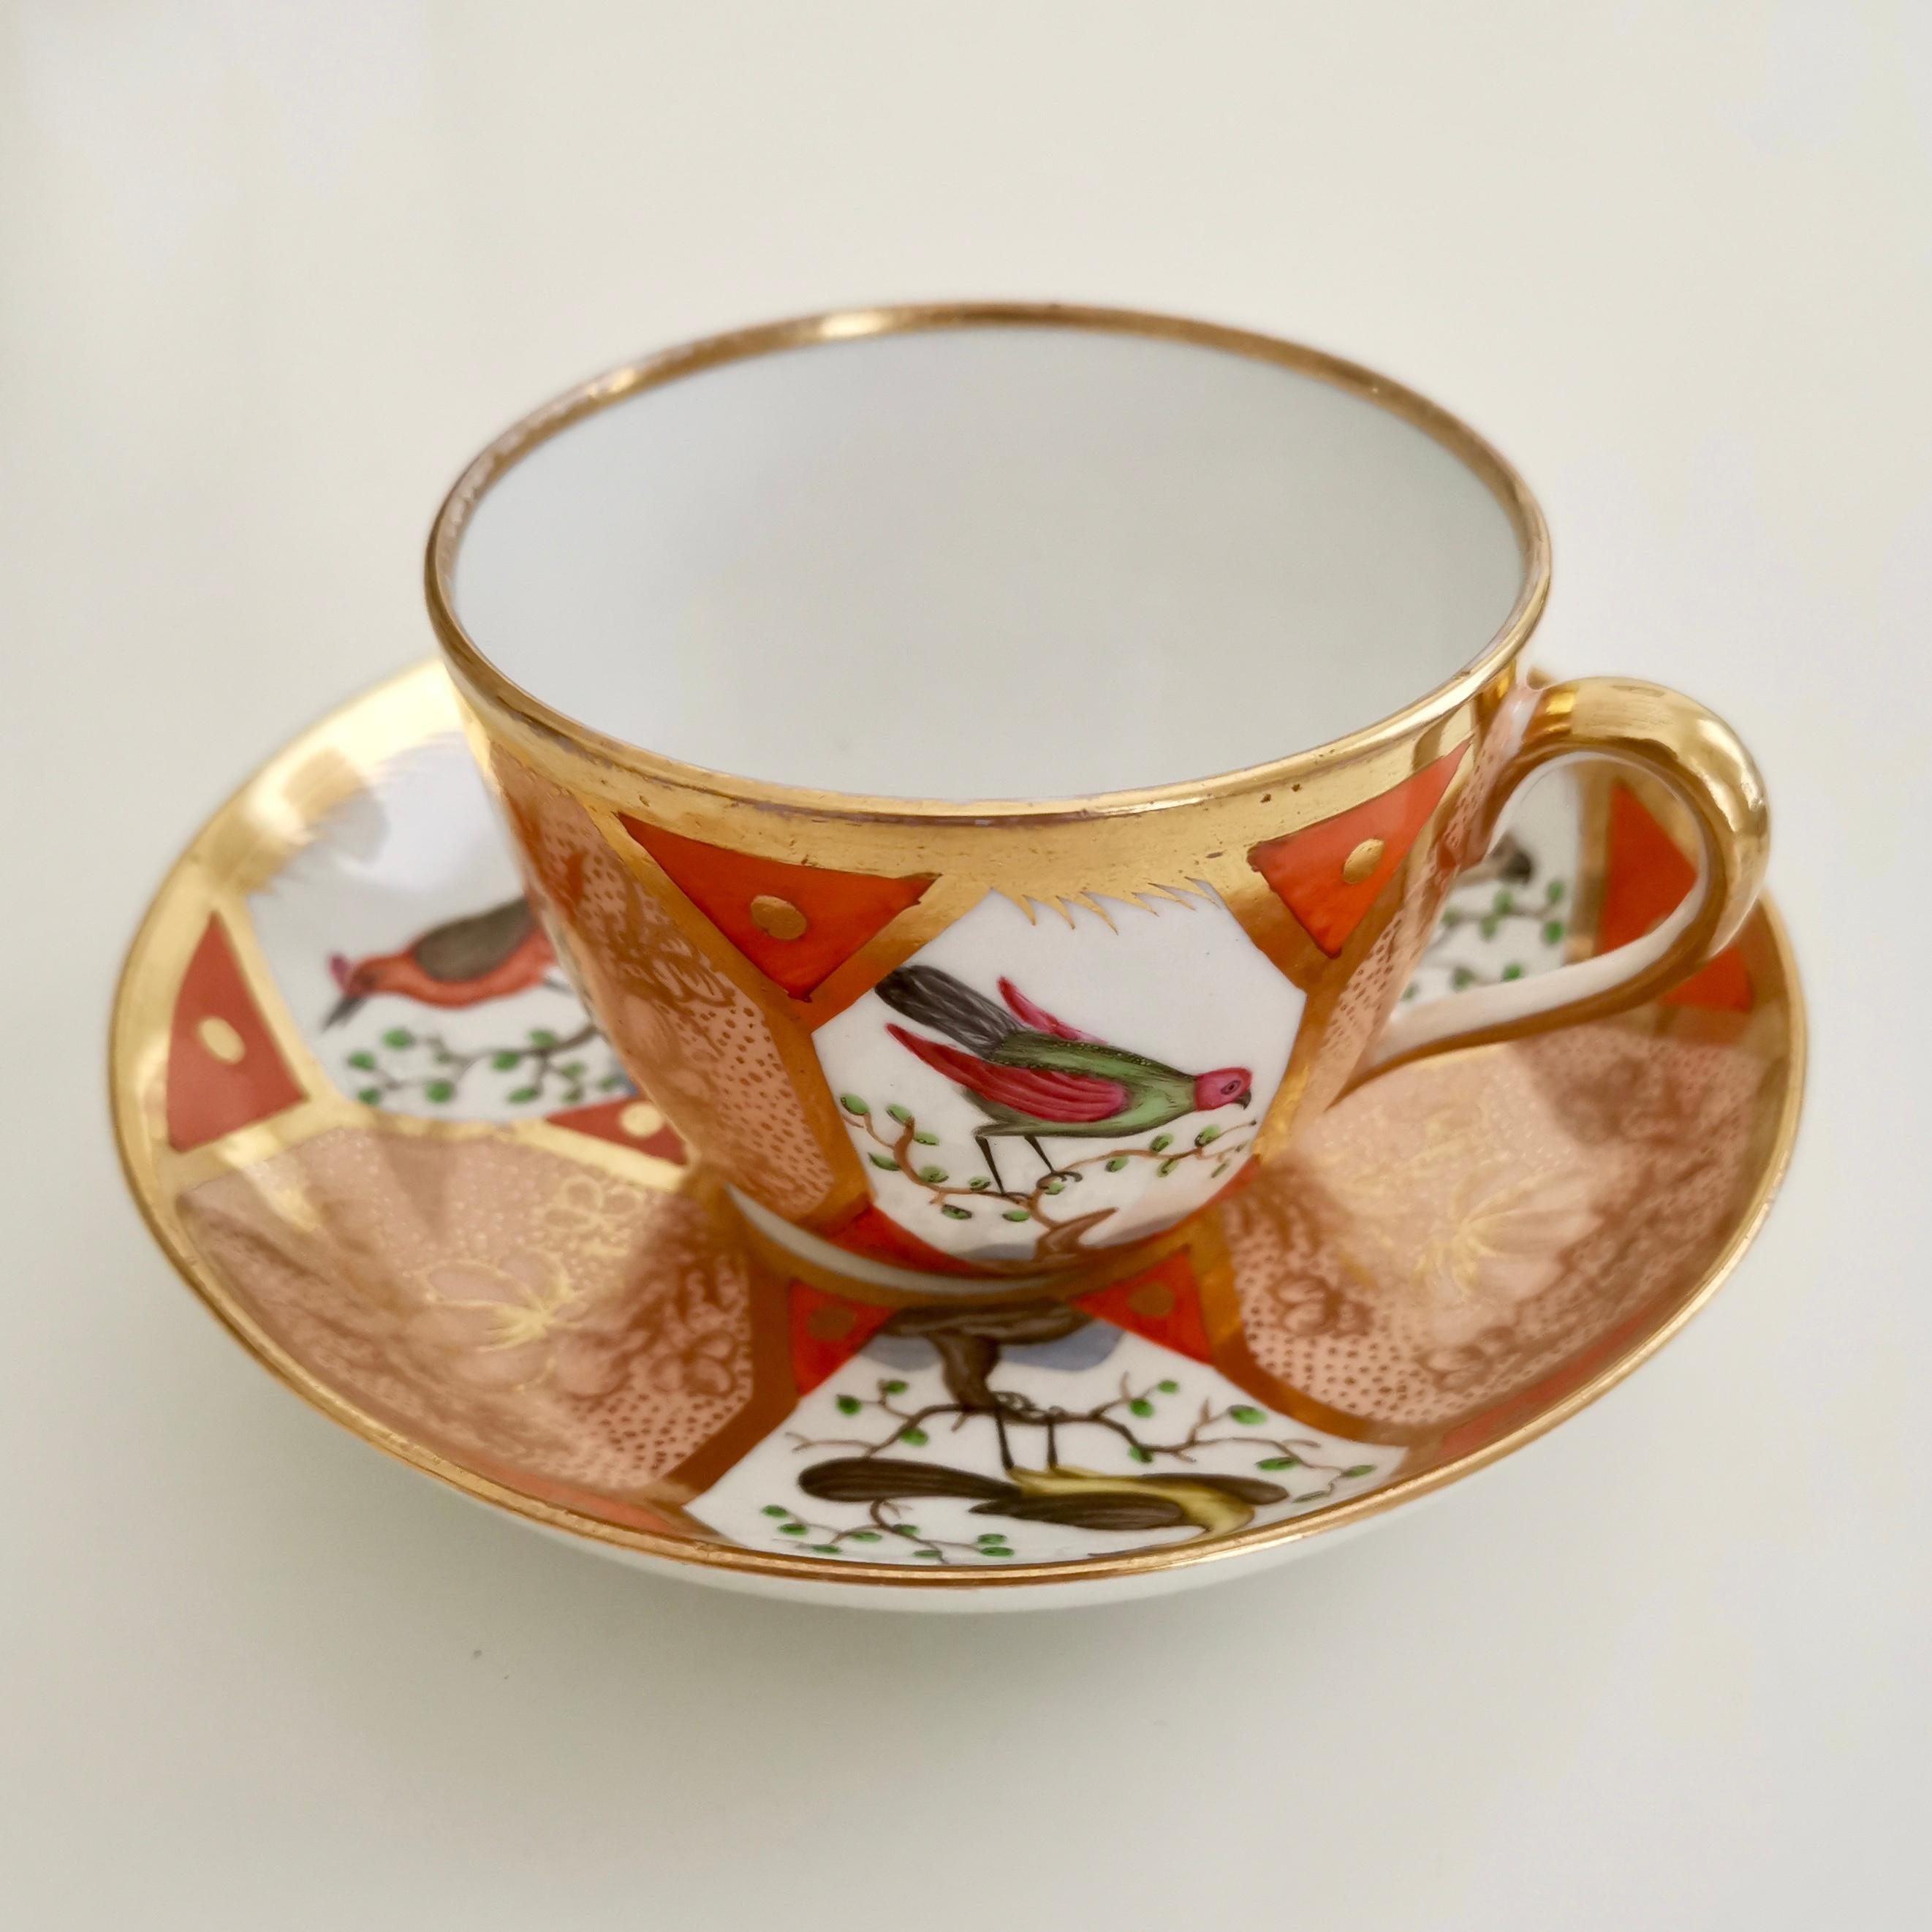 This is a very rare teacup and saucer made by Coalport in circa 1805. 

Coalport was one of the leading potters in 19th and 20th century Staffordshire. They worked alongside other great potters such as Spode, Davenport and Minton, and came out